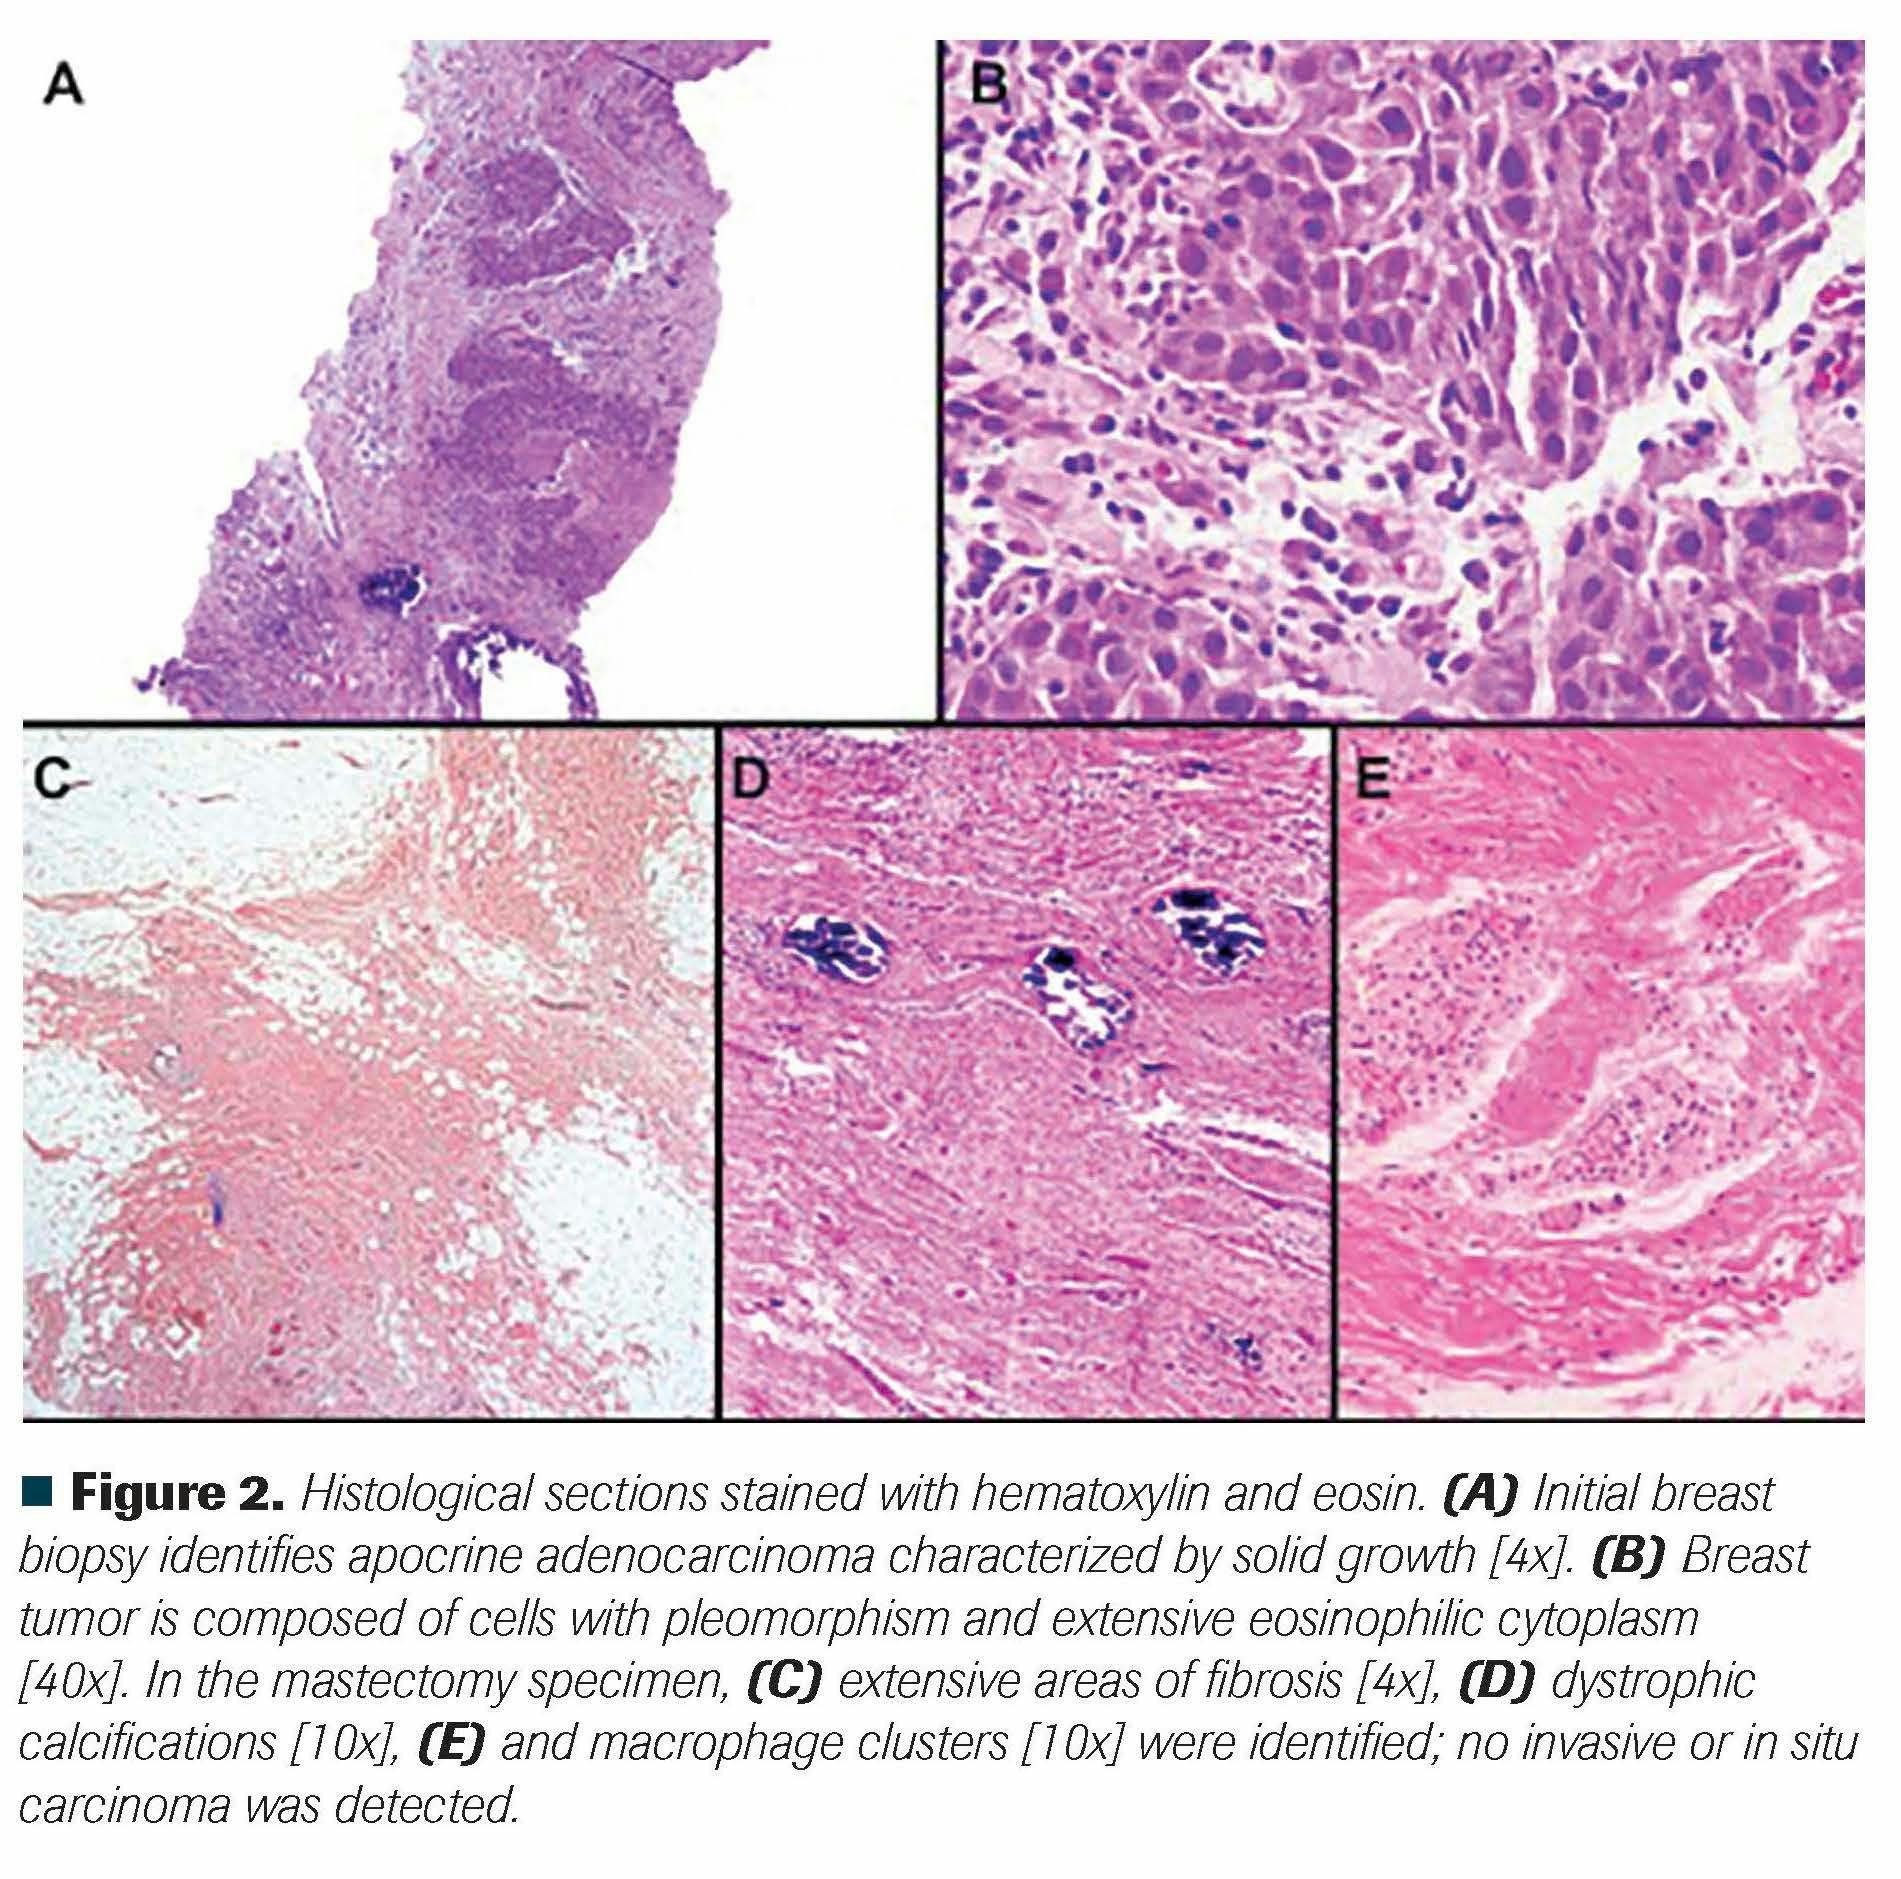 Figure 2. Histological sections stained with hematoxylin and eosin. (A) Initial breast biopsy identifies apocrine adenocarcinoma characterized by solid growth [4x]. (B) Breast tumor is composed of cells with pleomorphism and extensive eosinophilic cytoplasm [40x]. In the mastectomy specimen, (C) extensive areas of fibrosis [4x], (D) dystrophic calcifications [10x], (E) and macrophage clusters [10x] were identified; no invasive or in situ carcinoma was detected.